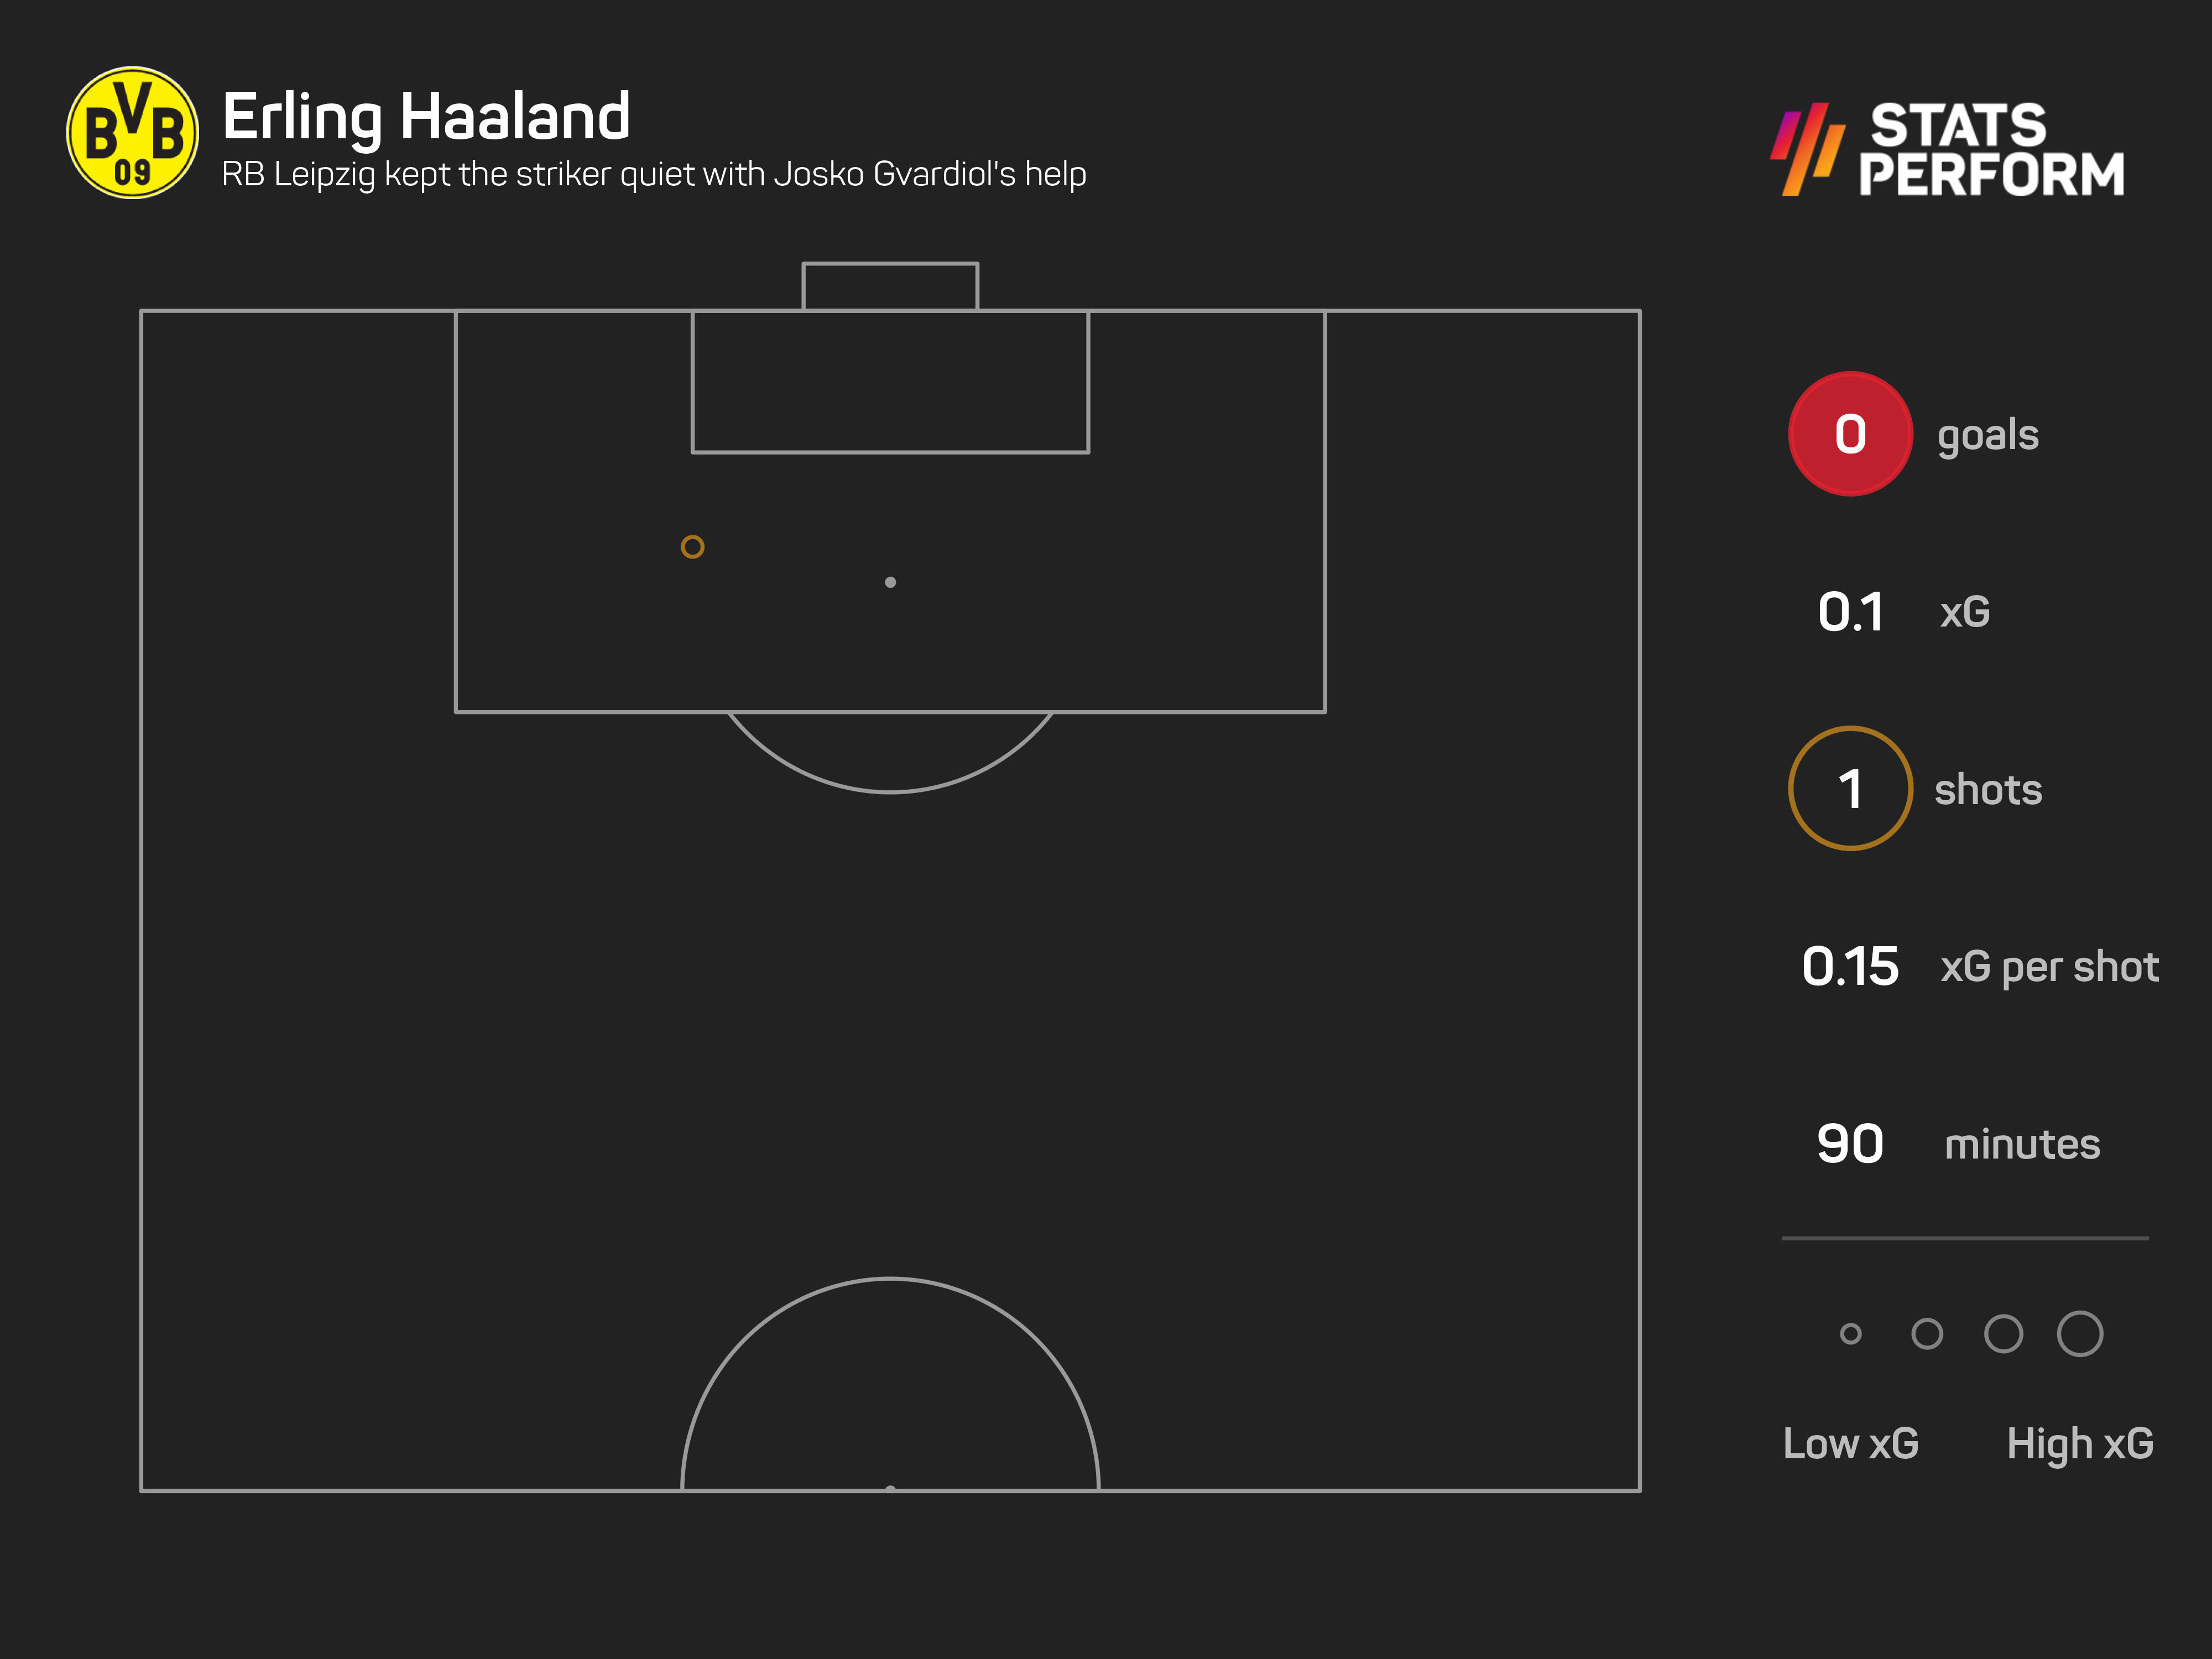 Erling Haaland only had one shot on the other occasion he played against Josko Gvardiol